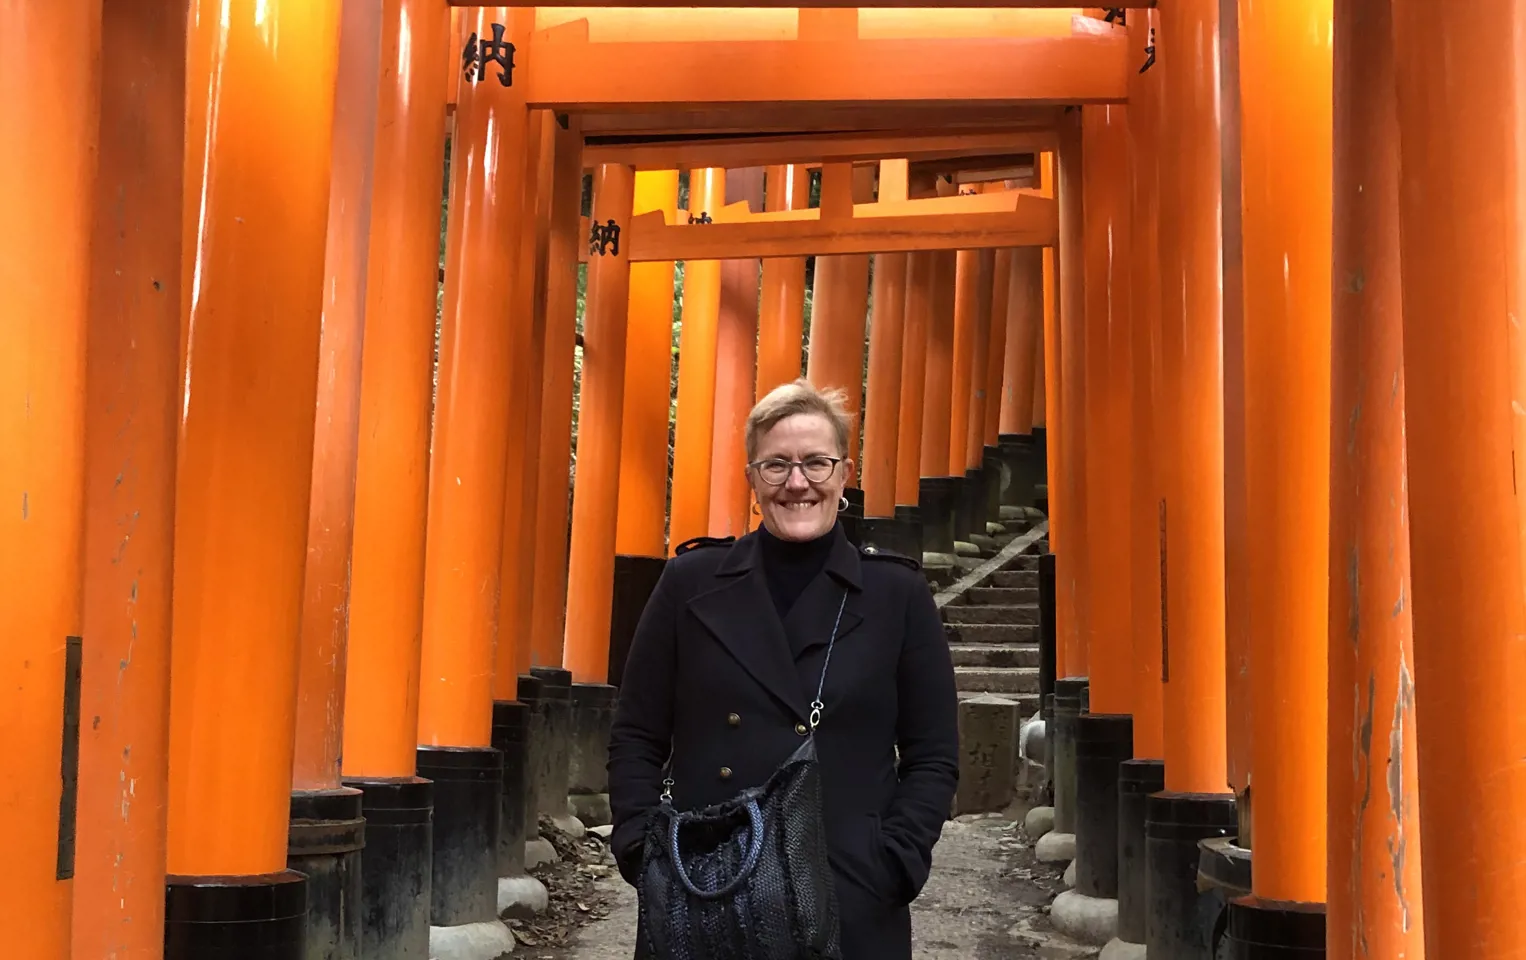 Alison standing under the orange arches in Japan in a black winter coat